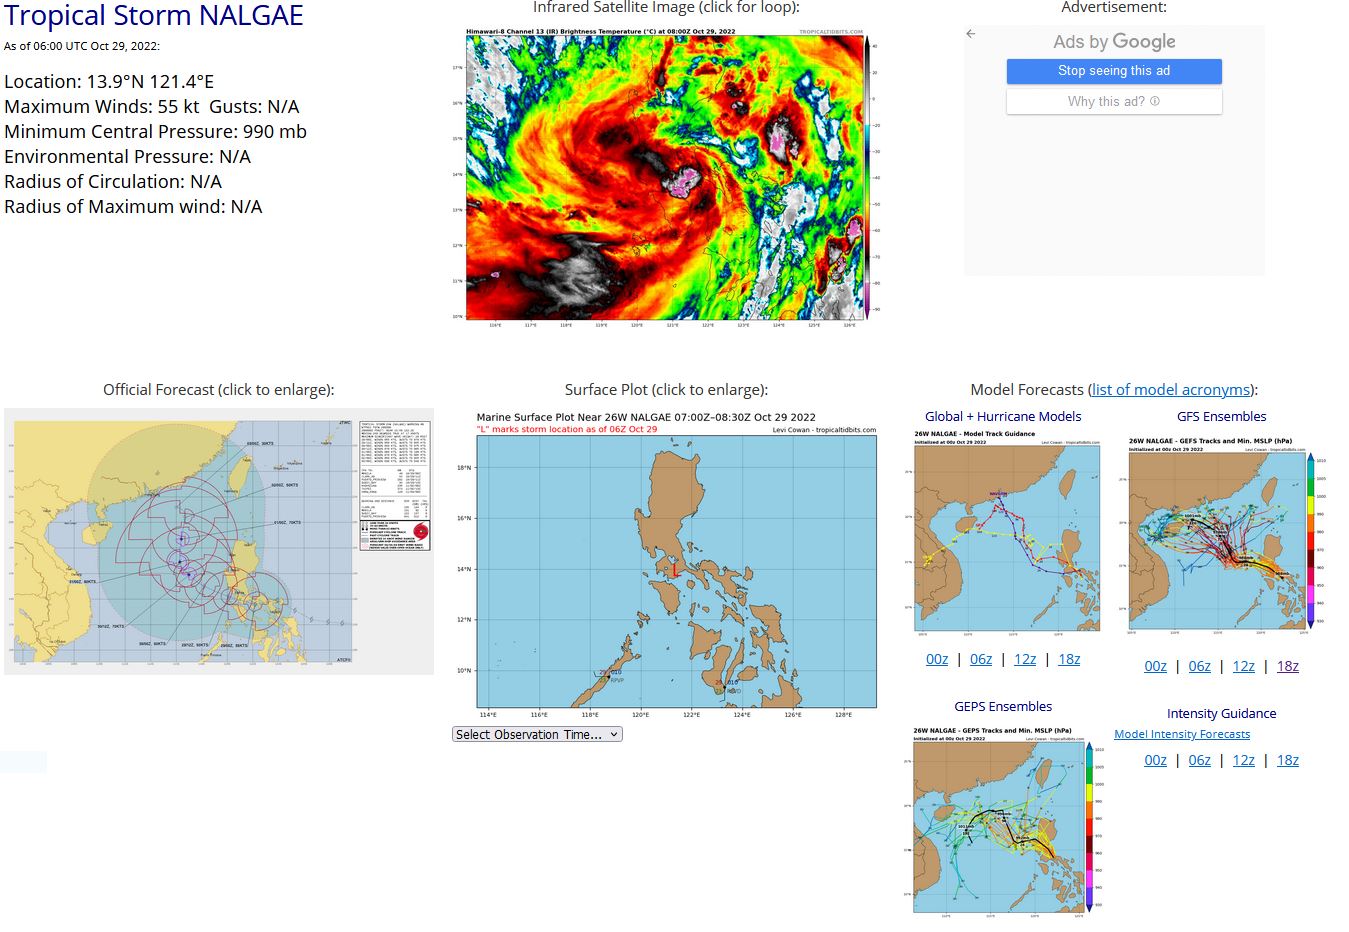 SATELLITE ANALYSIS, INITIAL POSITION AND INTENSITY DISCUSSION: TROPICAL STORM 26W IS CURRENTLY LOCATED TO THE SOUTHEAST OF MANILA AND HAS SLOWED DOWN CONSIDERABLY WHILE TRACKING WEST-NORTHWESTWARD OVER THE PAST SIX HOURS. ANIMATED MULTISPECTRAL SATELLITE IMAGERY  (MSI) DEPICTS PERSISTENT DEEP CONVECTION THAT CONTINUES TO FLARE UP  AND OBSCURE THE LOW LEVEL CIRCULATION CENTER (LLCC). THE INITIAL POSITION IS ASSESSED WITH HIGH CONFIDENCE BASED ON THE MULTI-AGENCY FIX POSITIONS AS WELL AS THE MSI IMAGERY. THE INITIAL INTENSITY IS ASSESSED WITH MEDIUM CONFIDENCE BASED ON THE A COMBINATION OF THE PGTW AND KNES INTENSITY ESTIMATES. ENVIRONMENTAL CONDITIONS HAVE REMAINED FAVORABLE, WITH LOW (10-15 KNOTS) VERTICAL WIND SHEAR (VWS), WARM (28-29C) SEA SURFACE TEMPERATURES (SSTS), AND GOOD WESTWARD AND EQUATORWARD OUTFLOW. HOWEVER, THE ONLY INHIBITING FACTOR IS THE RUGGED TERRAIN OF THE CENTRAL PHILIPPINES, WHICH IS DISRUPTING THE LOW-LEVEL FLOW INTO THE CORE OF THE SYSTEM.